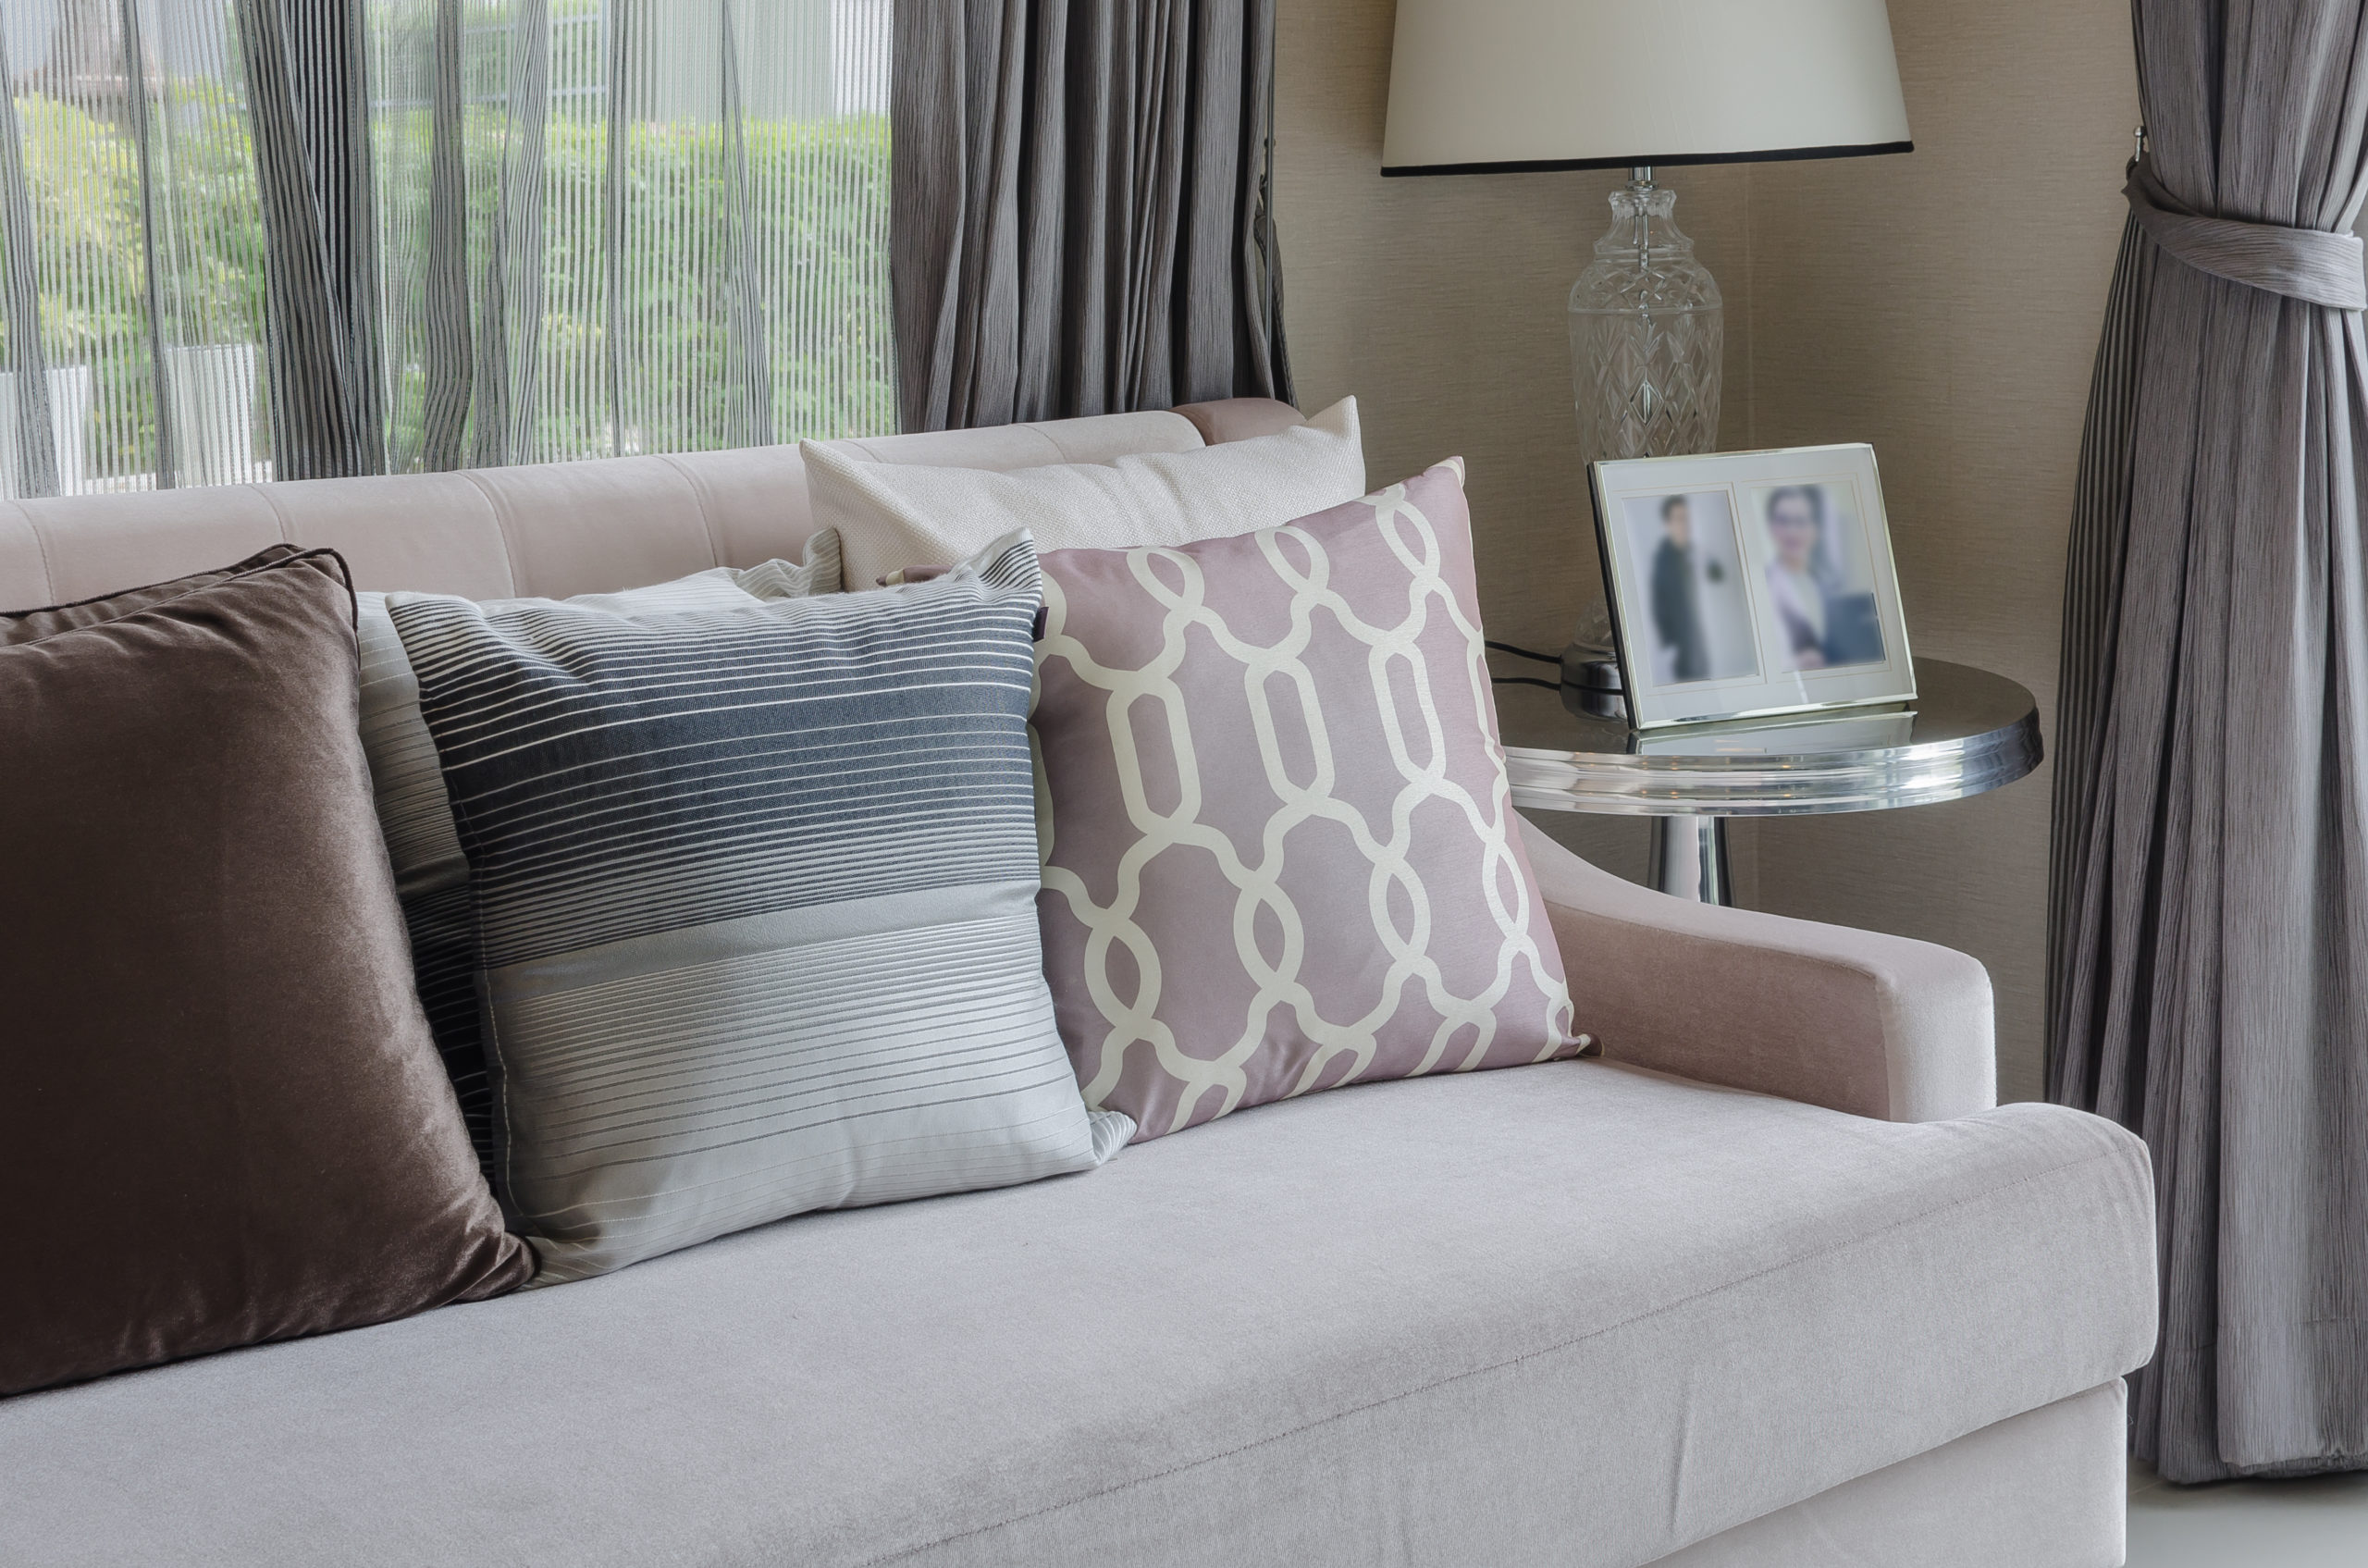 Couch with decorative pillows beside a side table with a lamp and photos in Grimsby, Ontario